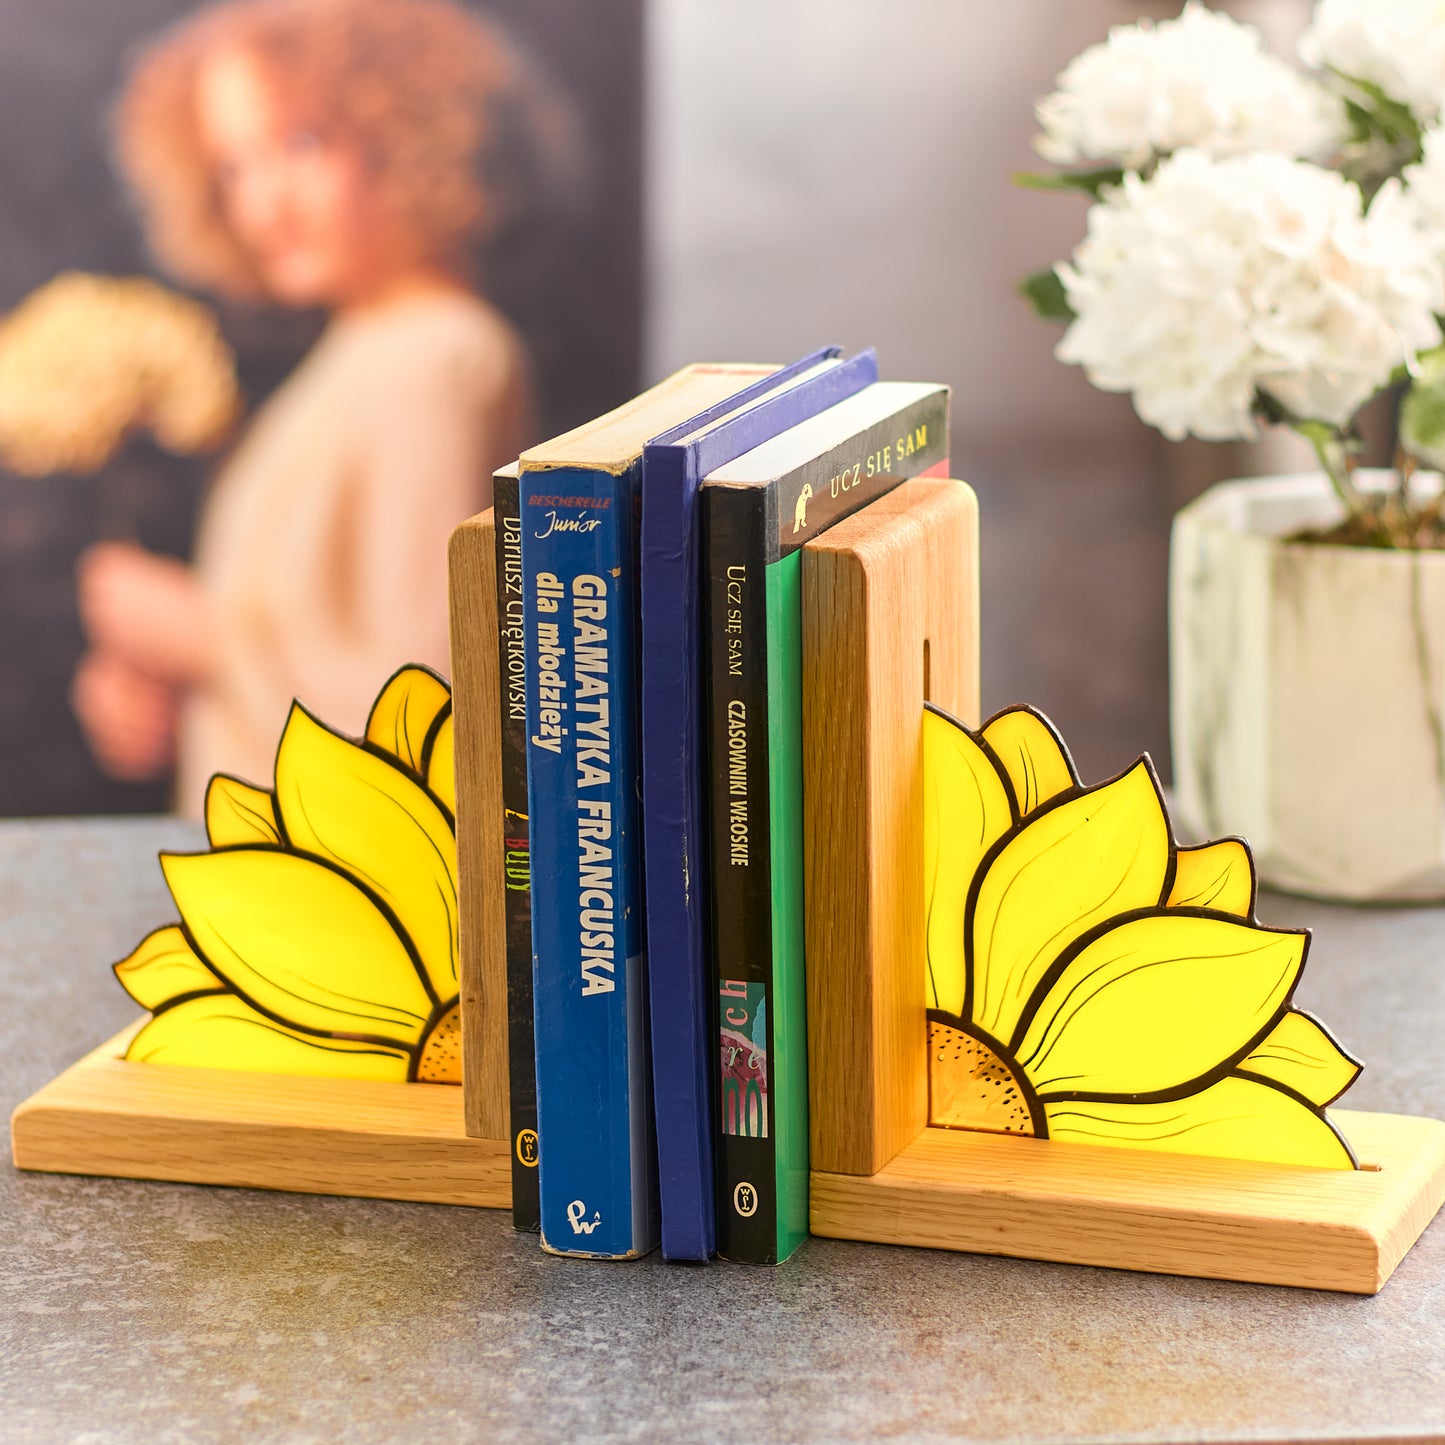 Sunflower Bookend Stained Glass